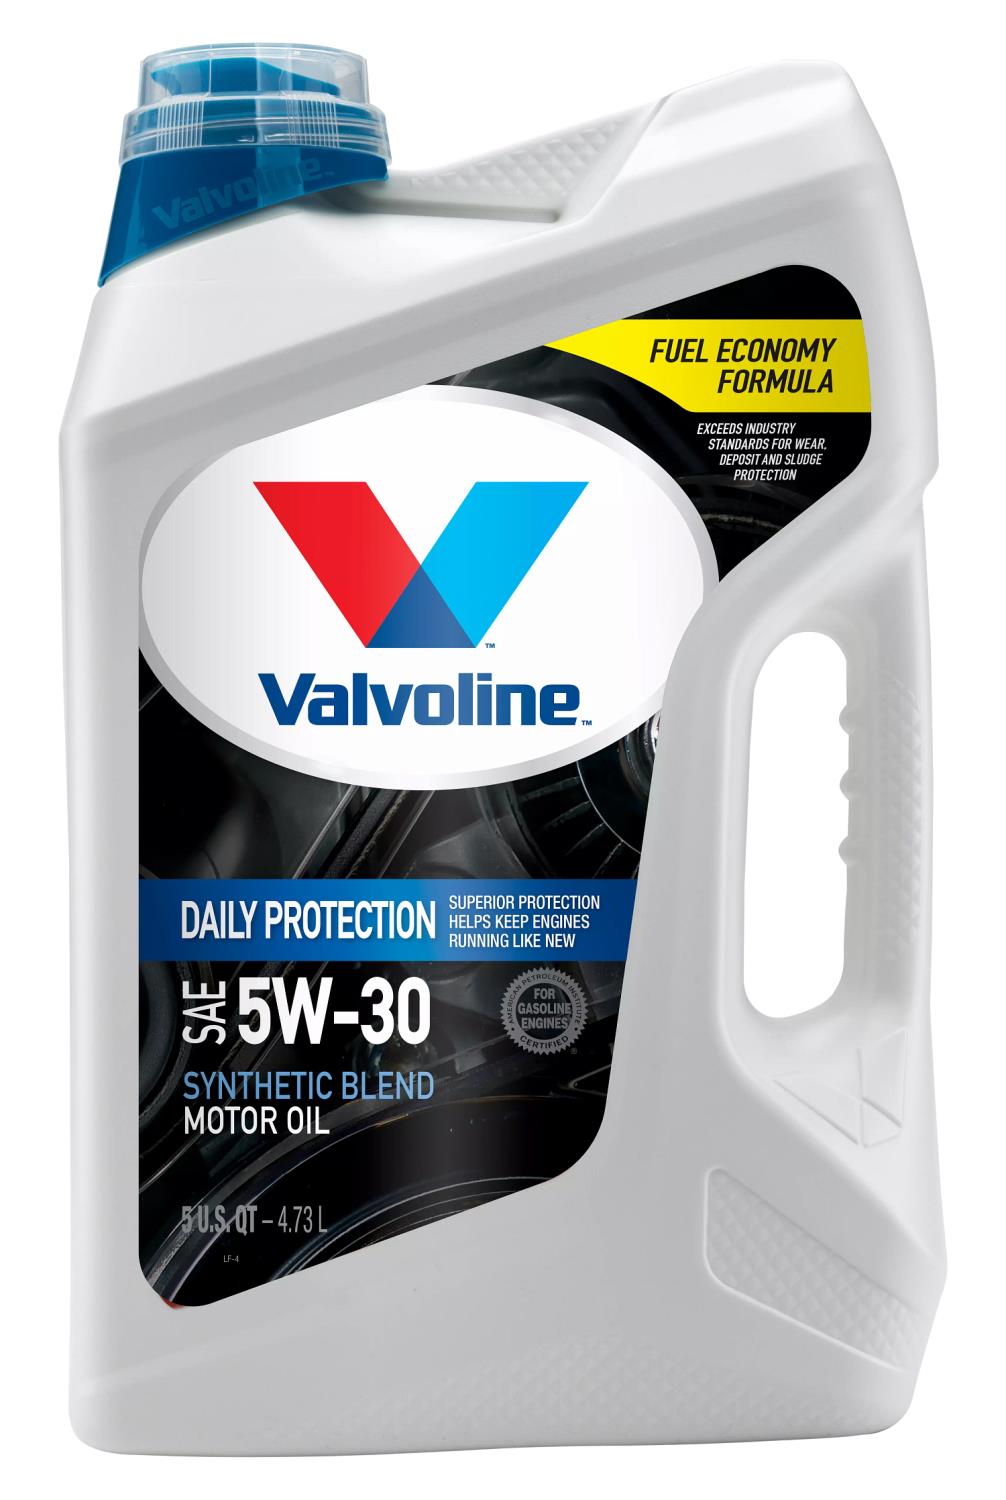 Daily Protection Synthetic Blend Motor Oil 5W30 [5-Quarts]